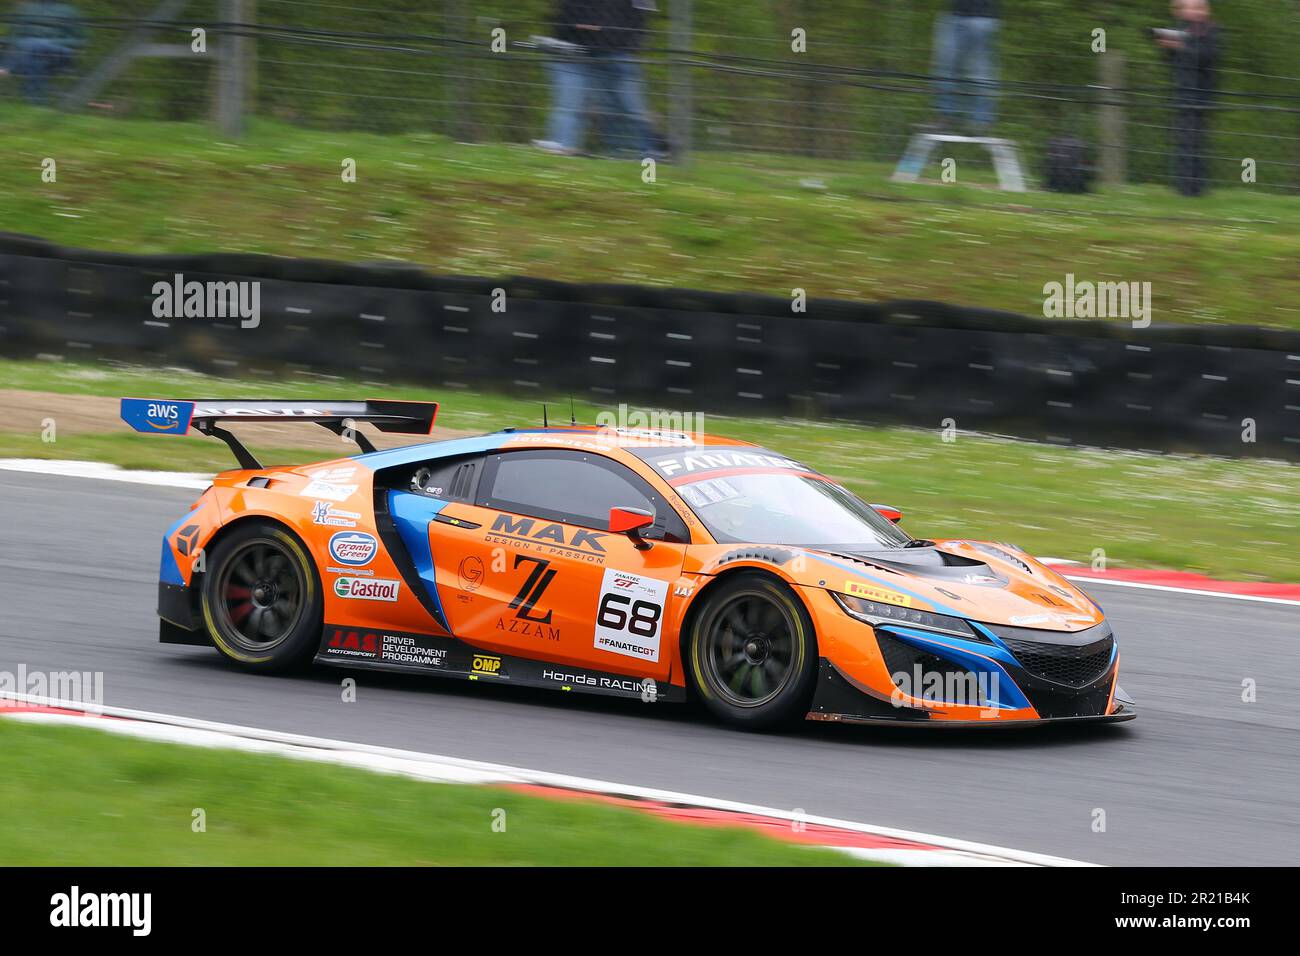 Erwin Zanotti - Nova Race -  driving Honda NSX GT3 number 68 in the 2023 GT World Challenge Europe Sprint Cup at Brands Hatch in May 2023 Stock Photo